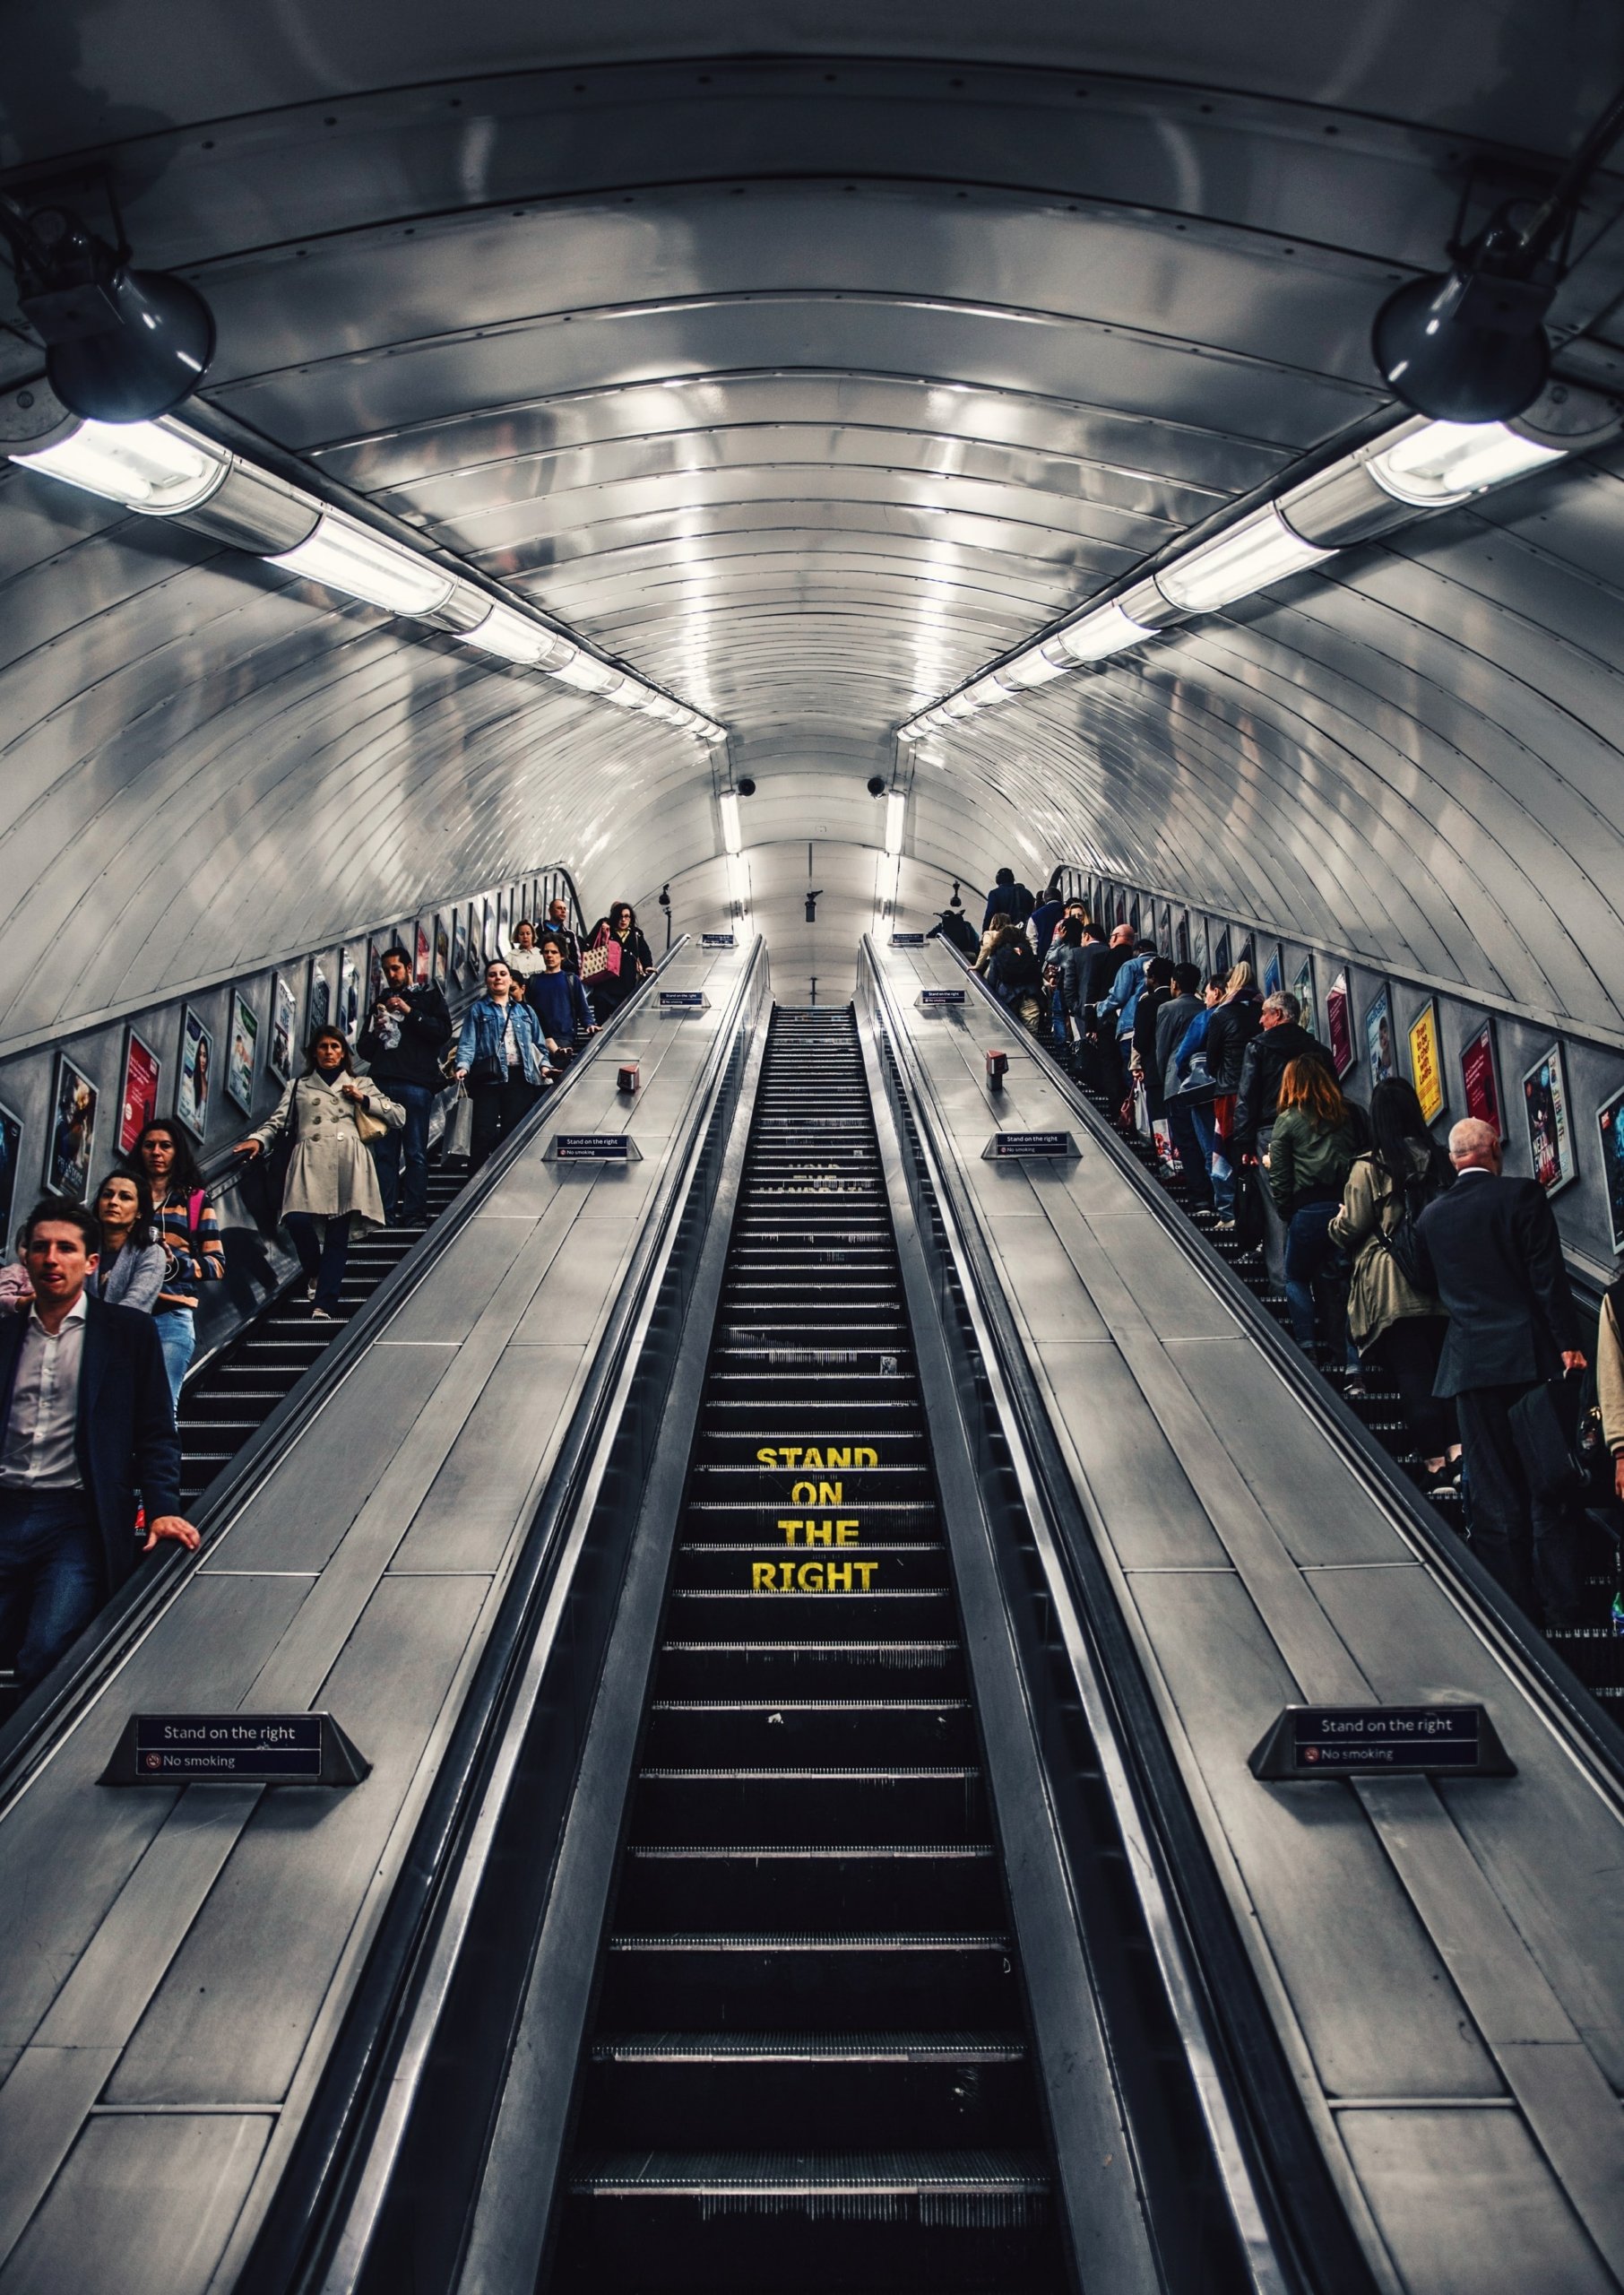 Mental Wellbeing - people riding the escalator in the London Tube